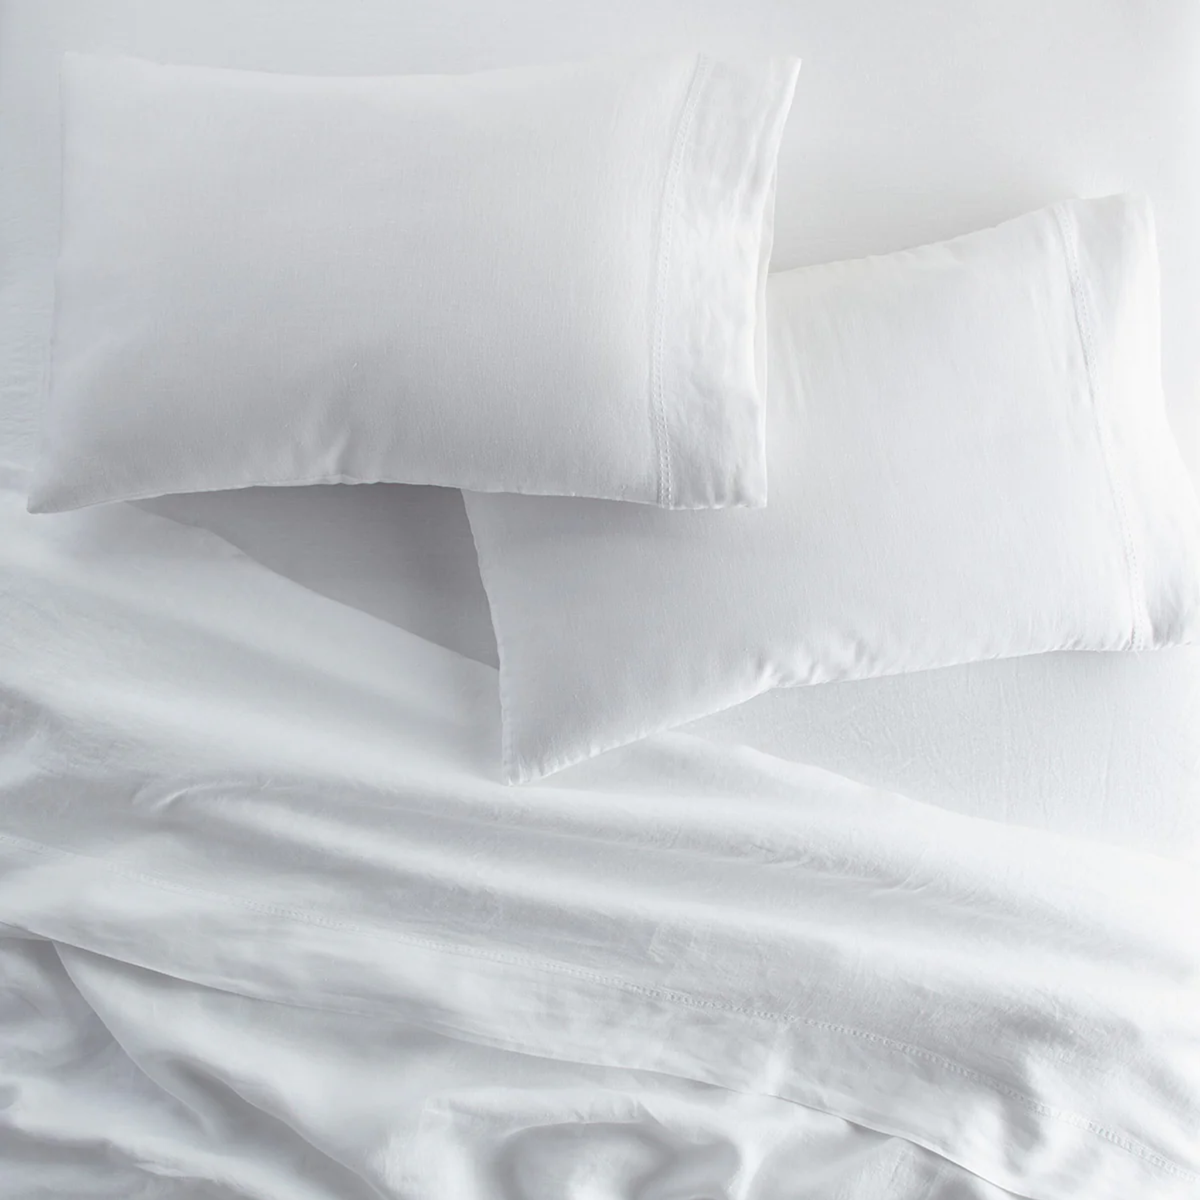 Pair of Pillowcases of Peacock Alley European Washed Linen Bedding in White Color